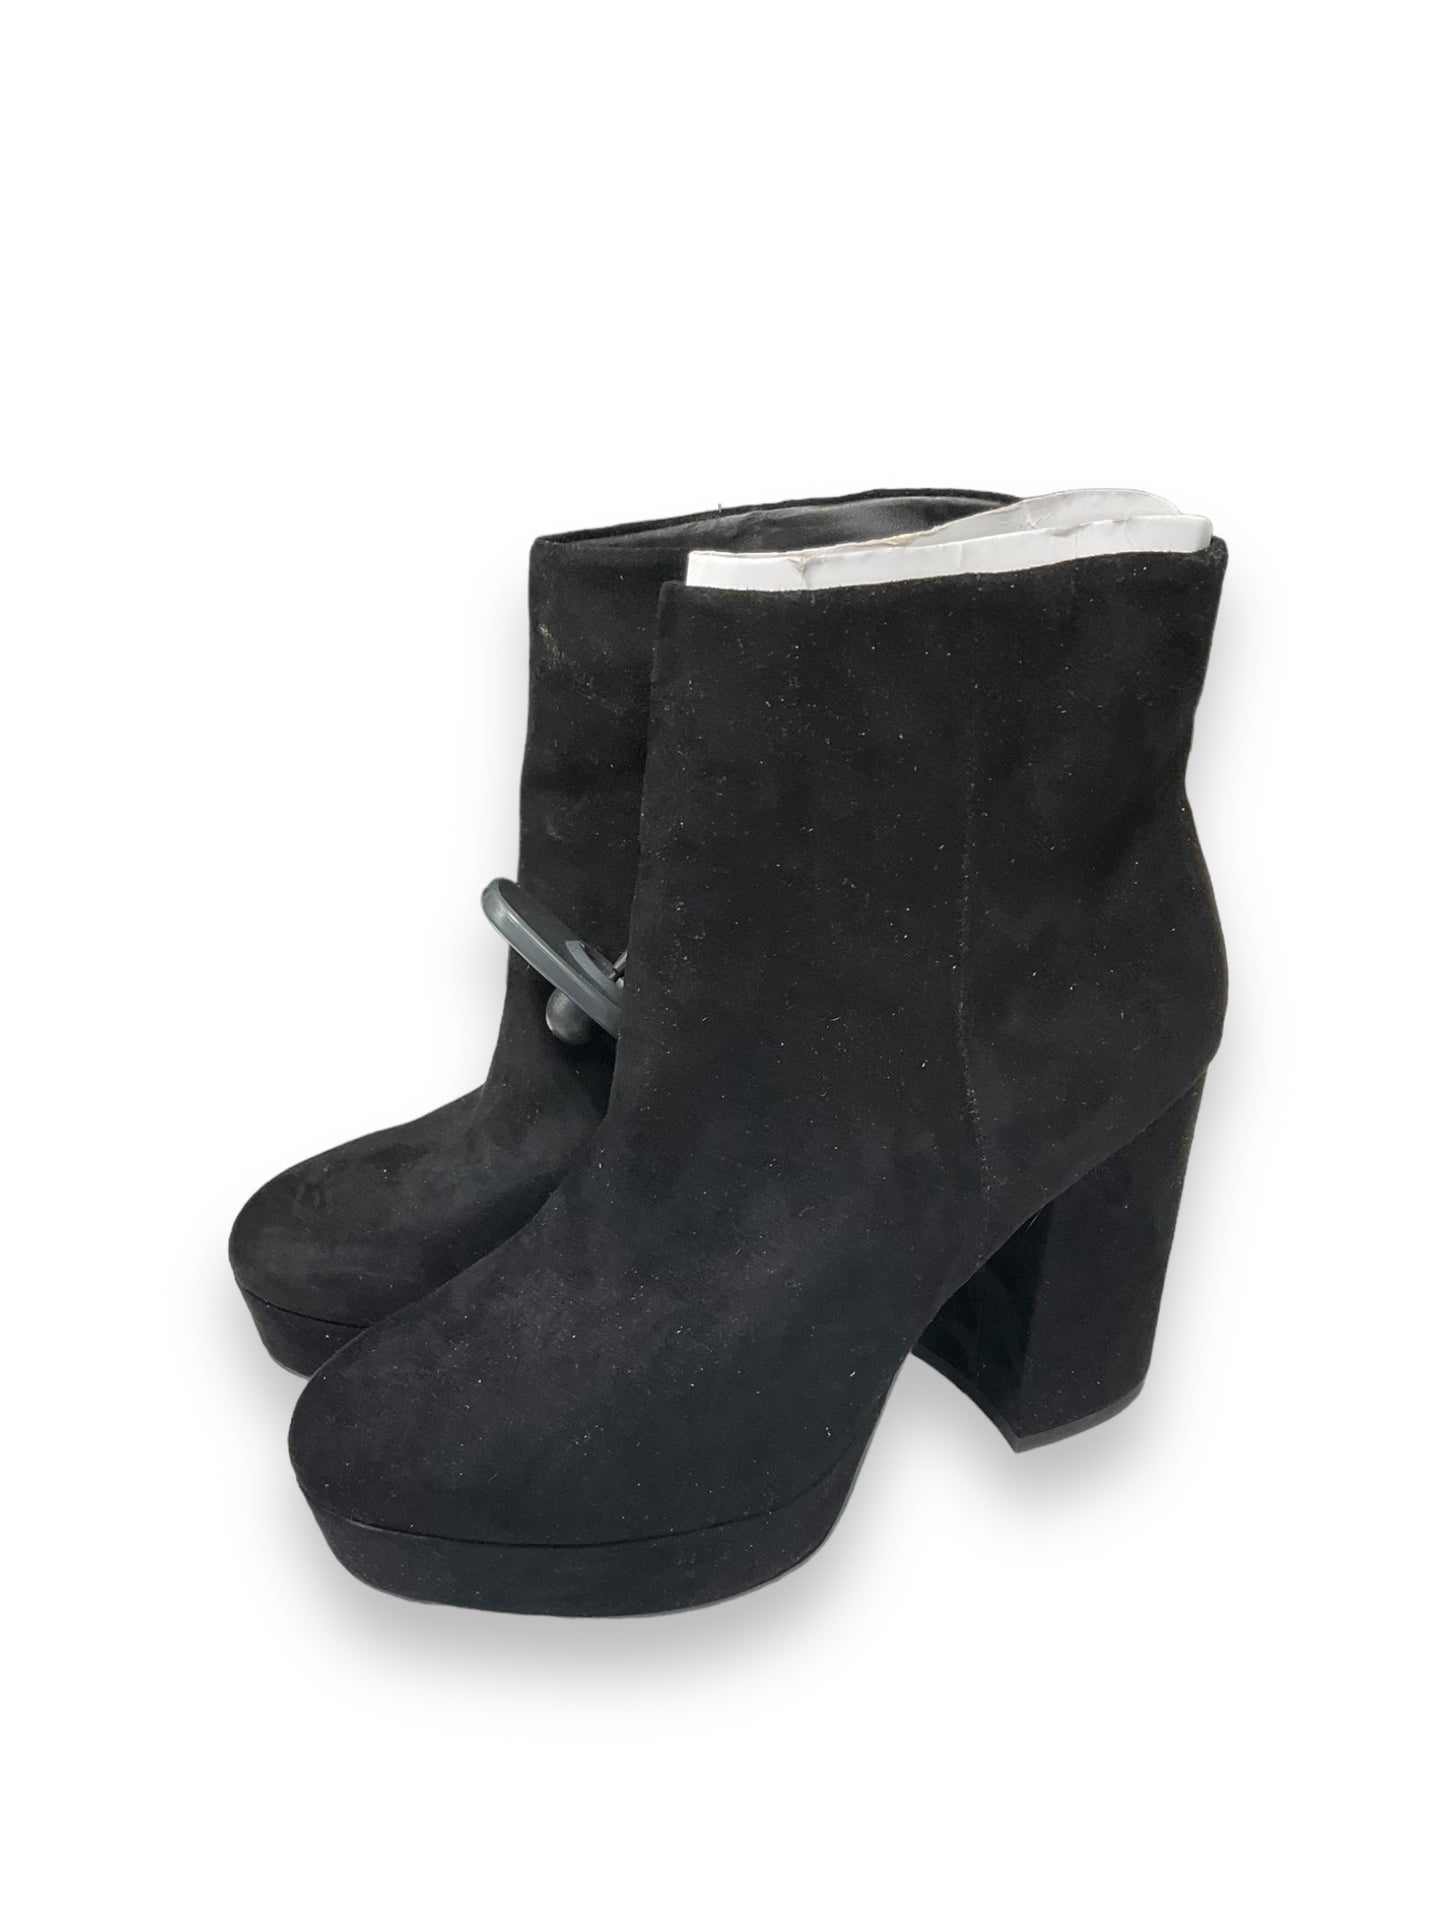 Boots Ankle Heels By Mossimo  Size: 6.5